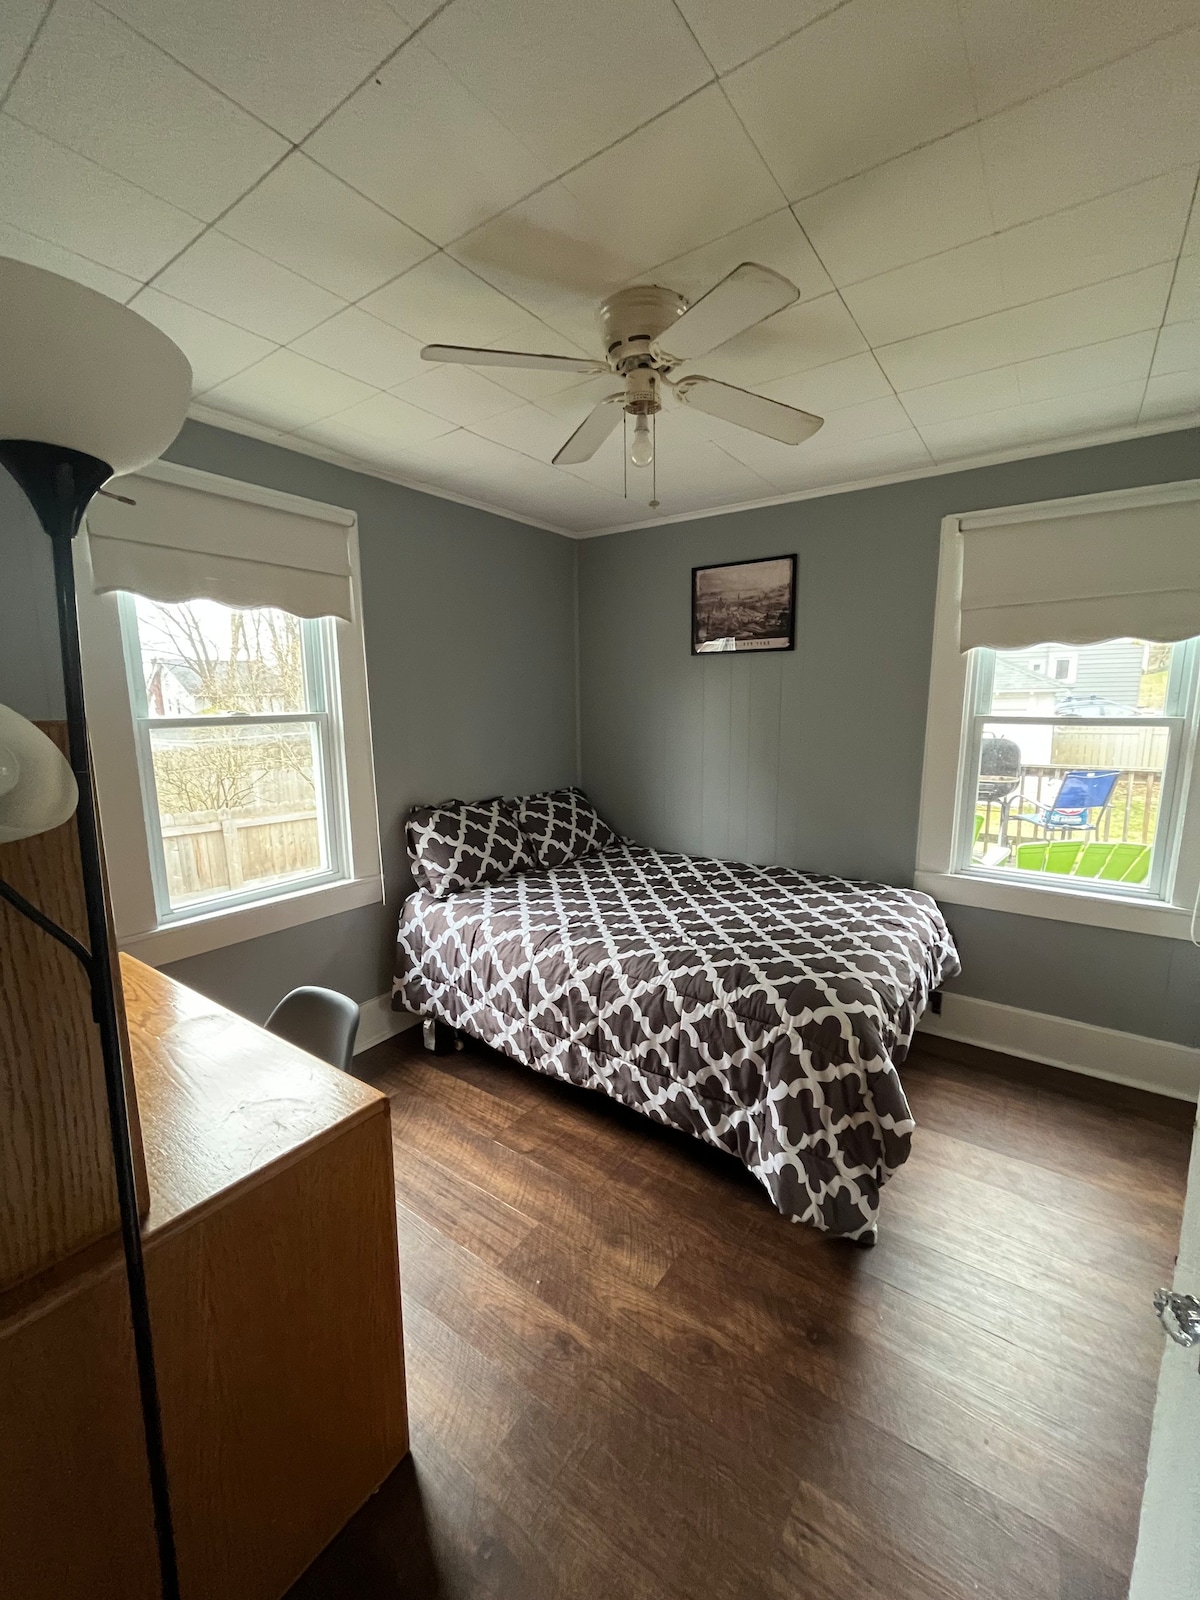 Another Simple bedroom in Syracuse University area